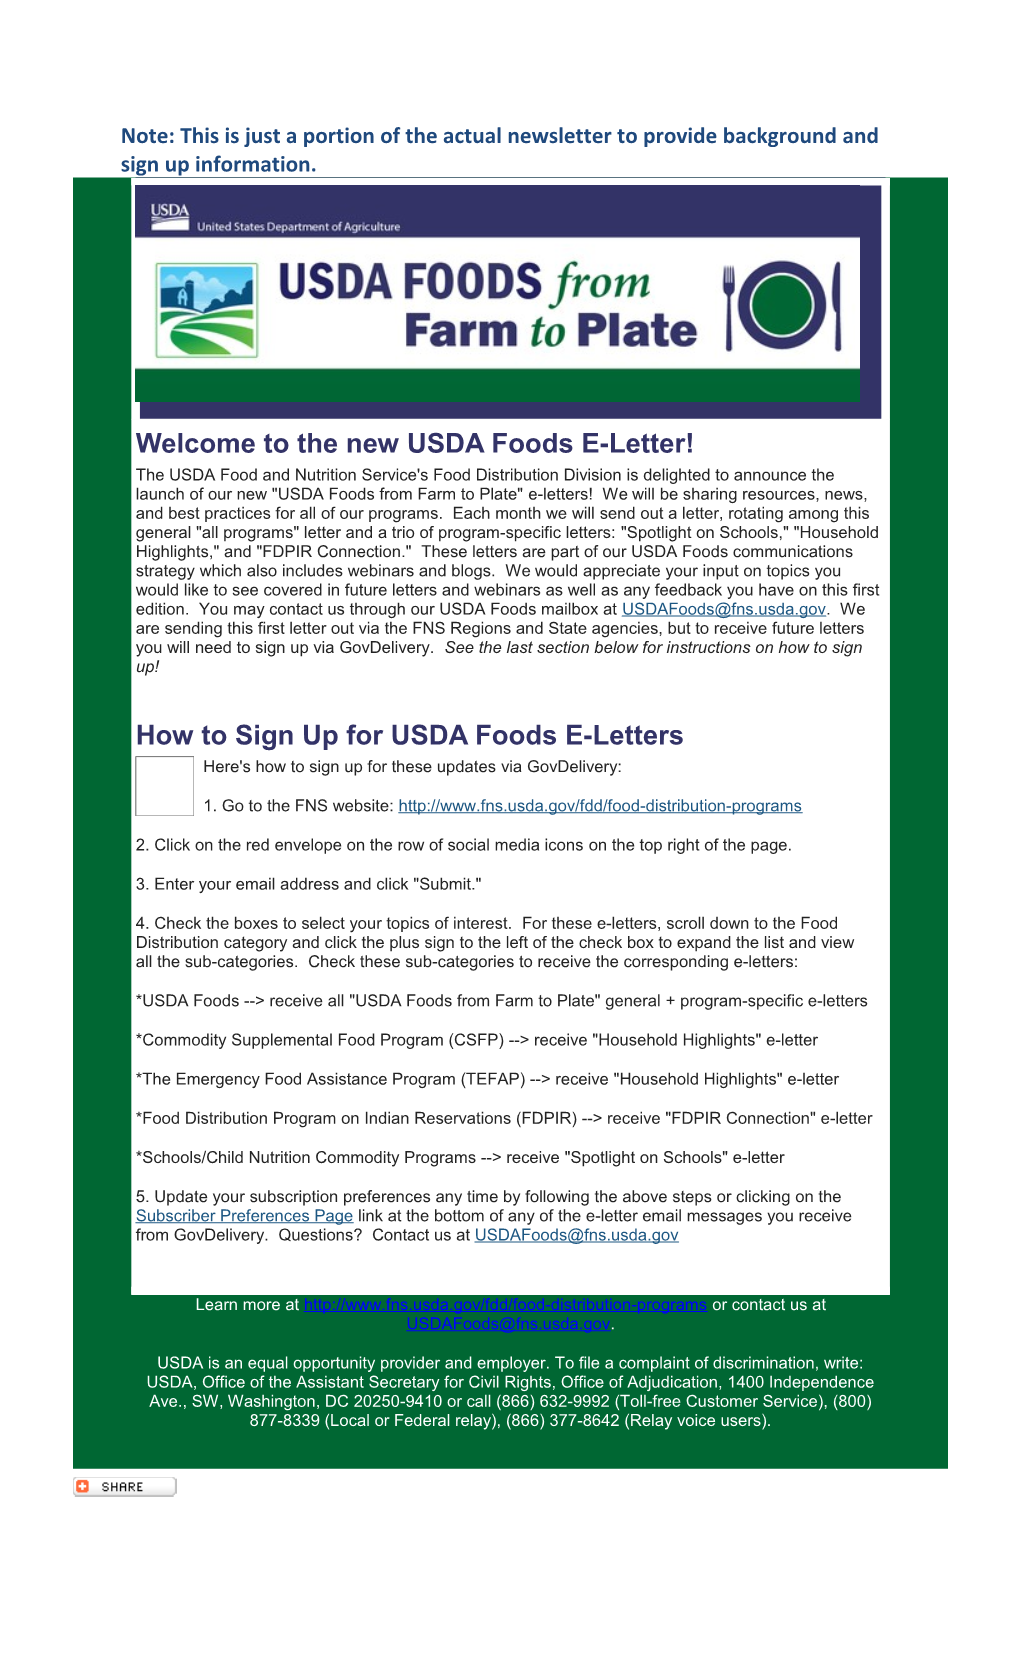 Welcome to the New USDA Foods E-Letter!